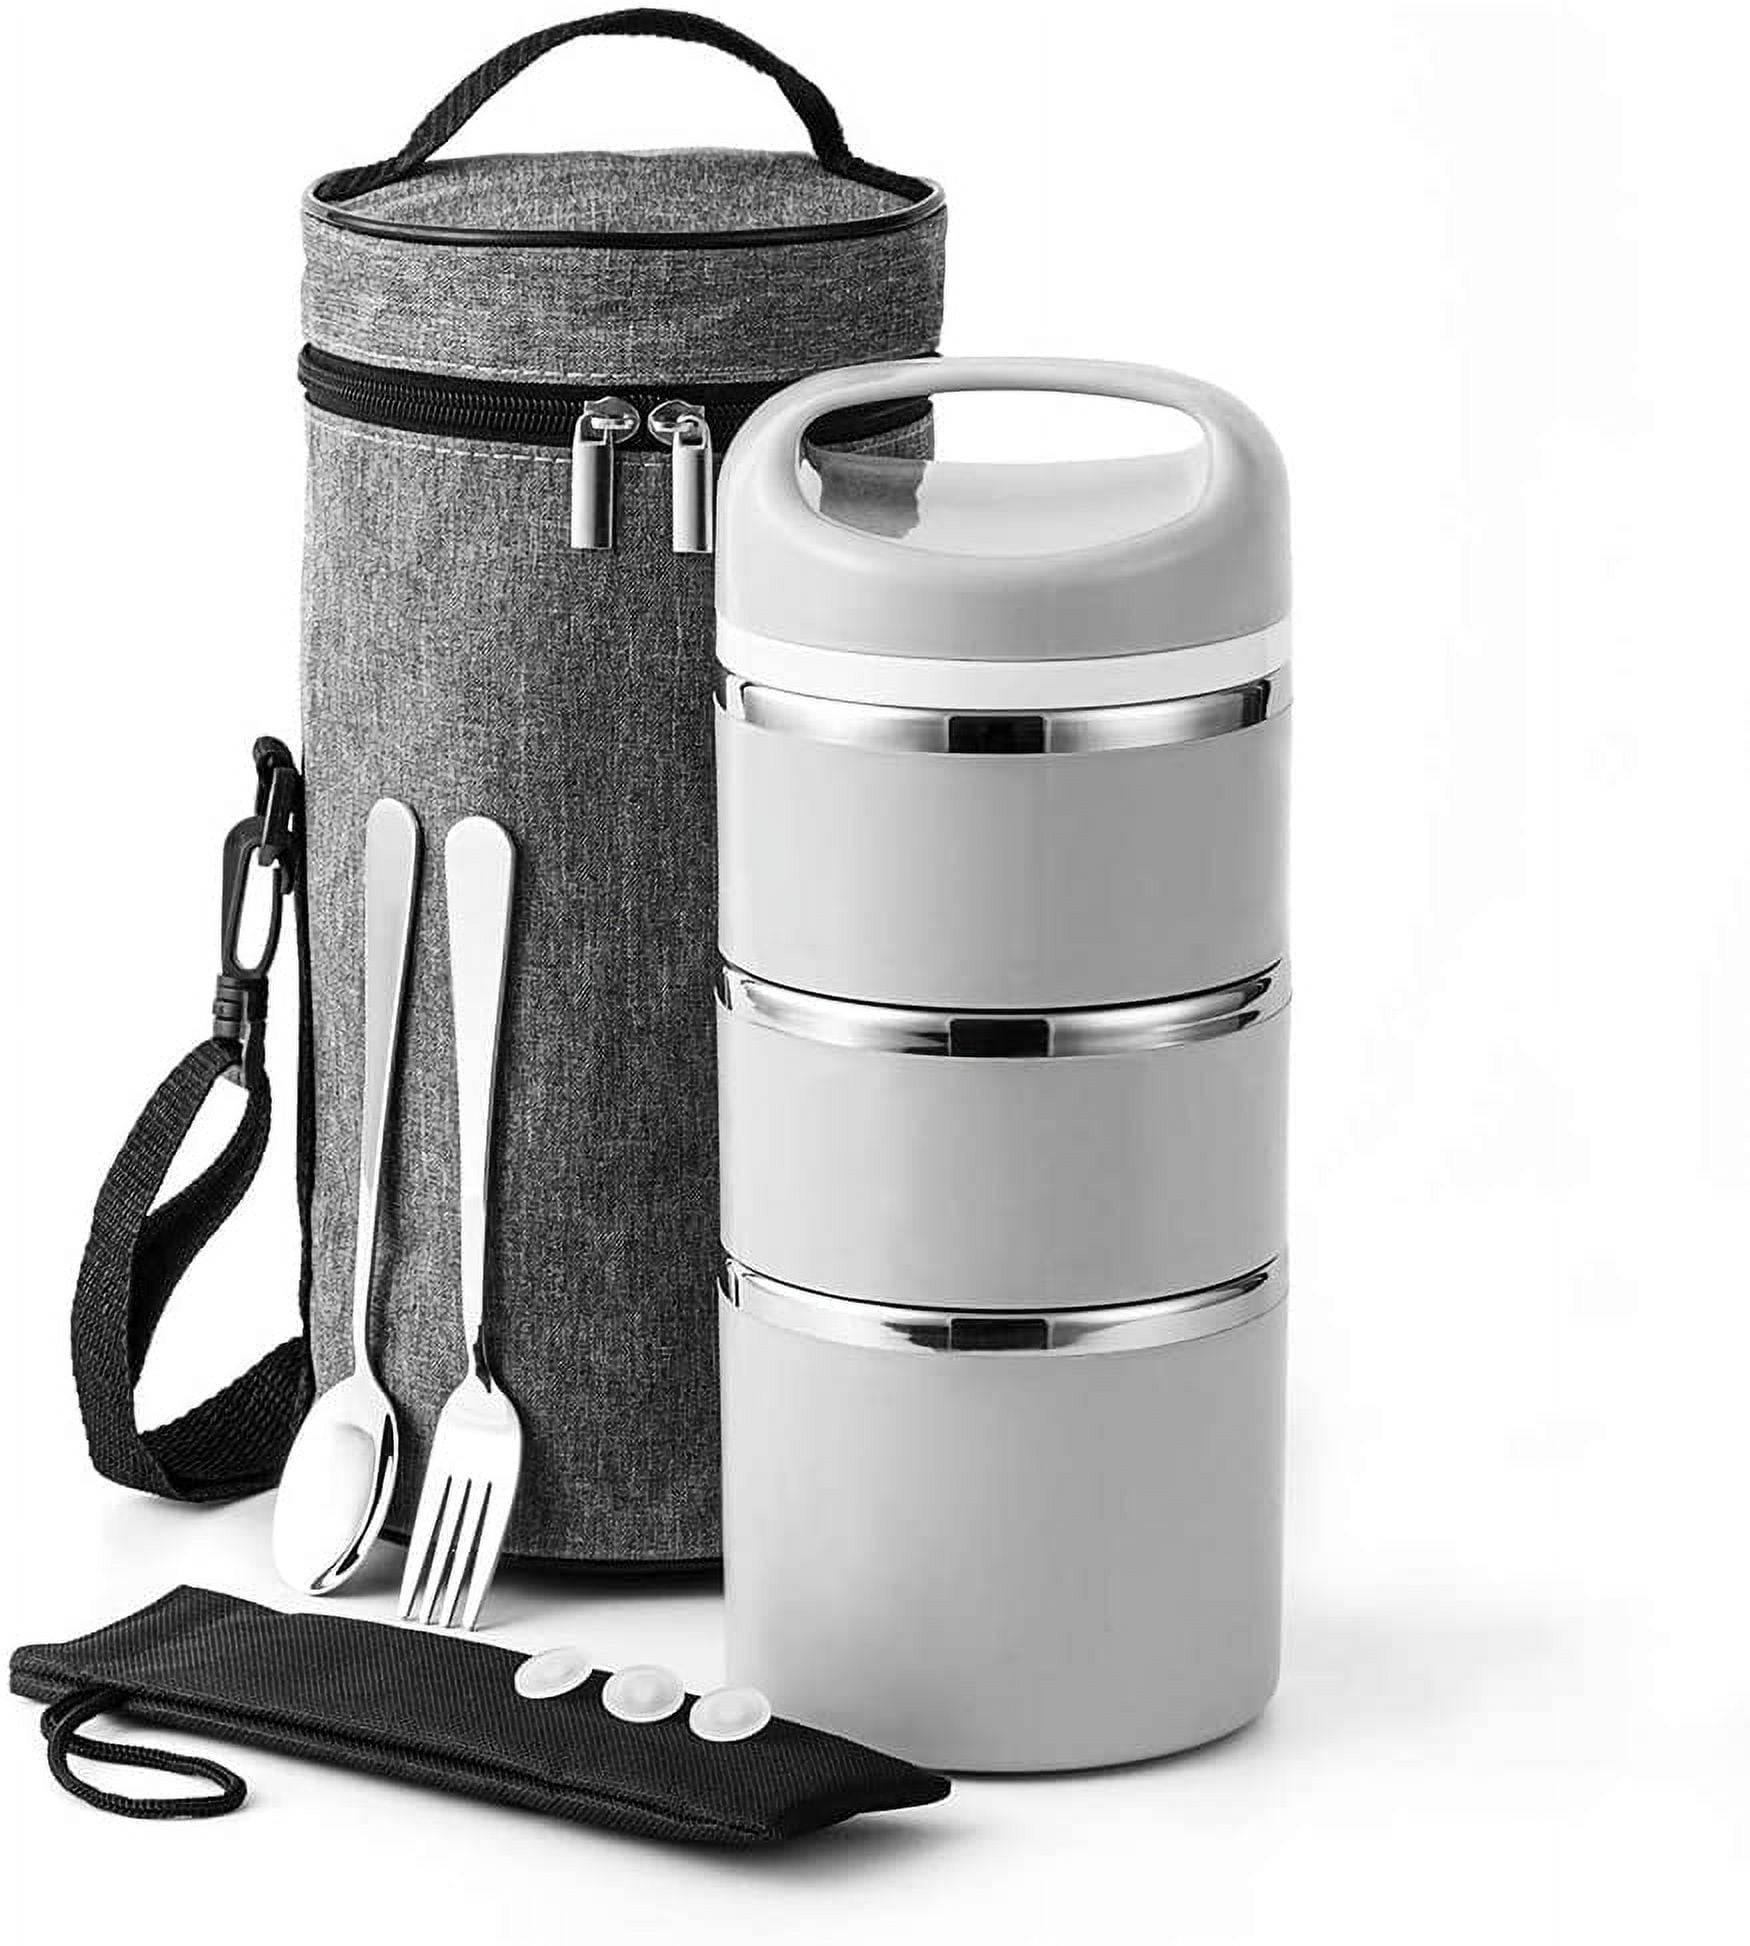  ArderLive Stackable Lunch Box, Stainless Steel Thermal